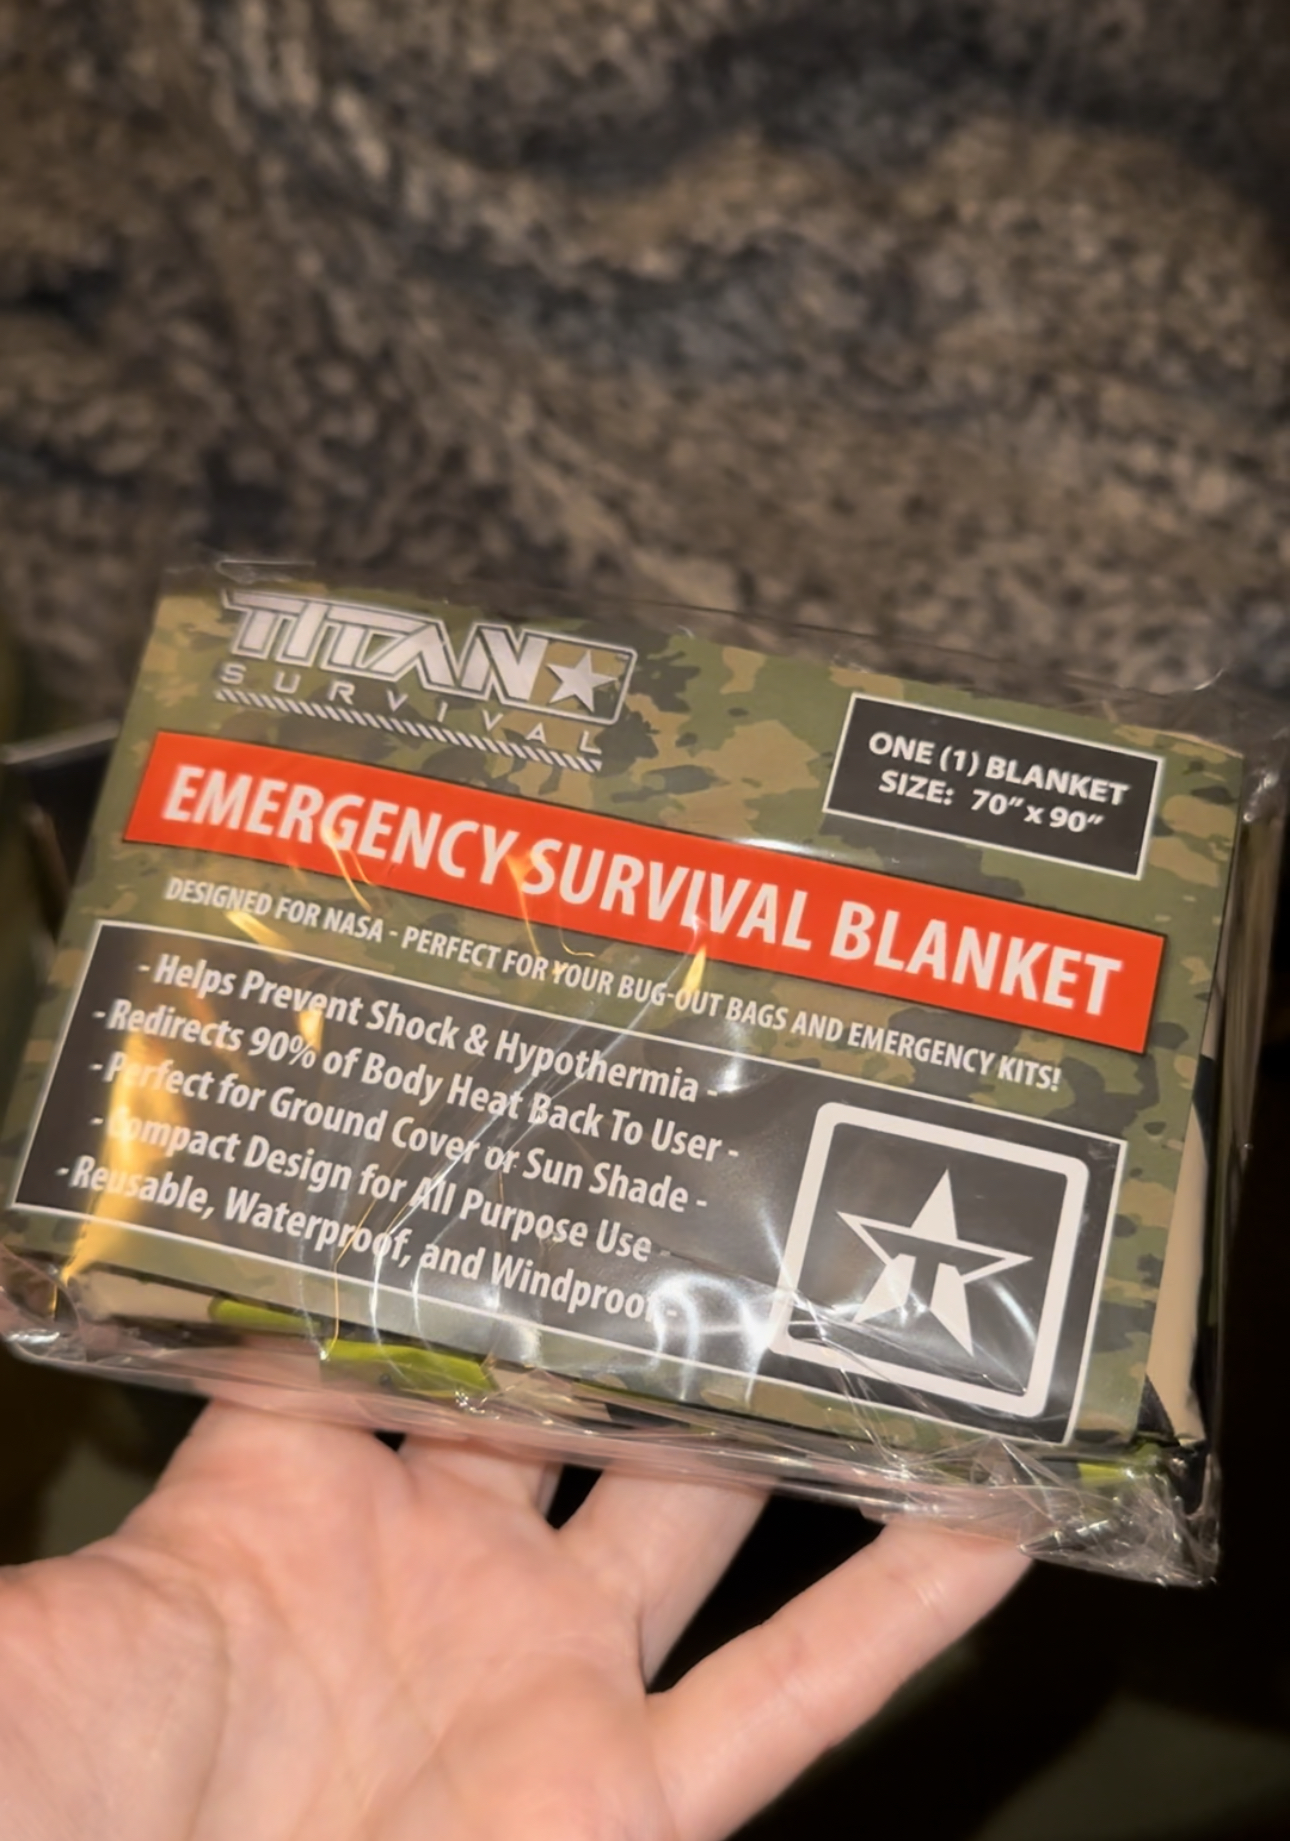 The Best Survival Blankets on the Market by Titan Survival | OutdoorHub